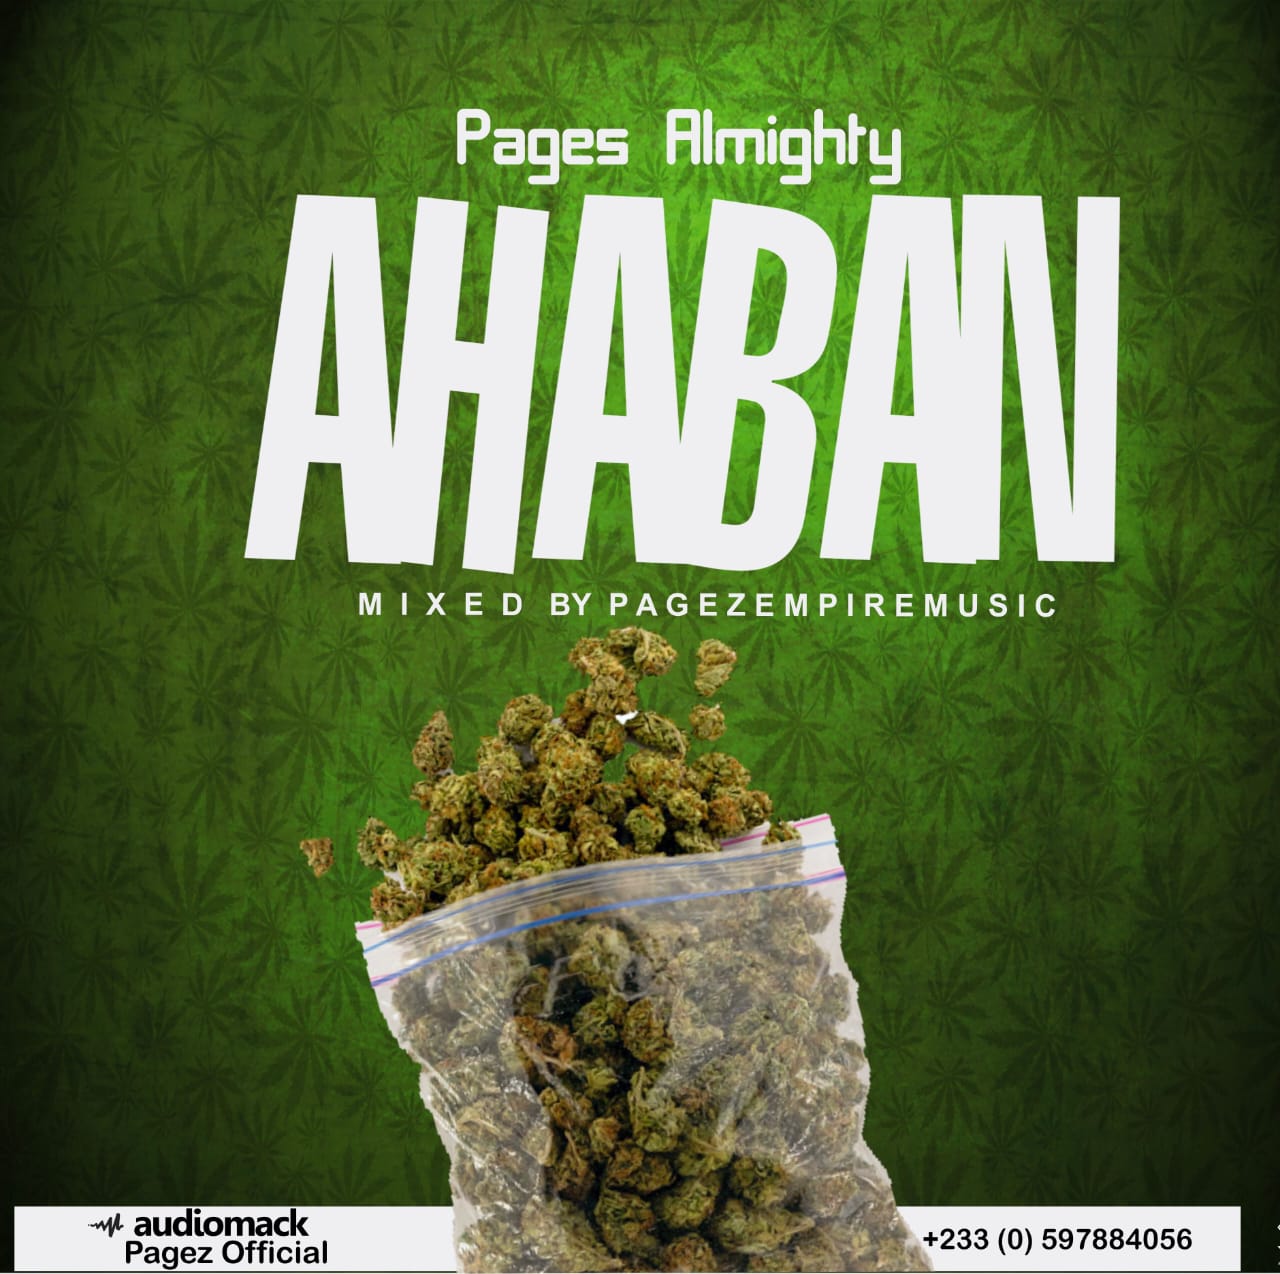 Download mp3: Pagez Almighty _ Ahaban [Mixed by Pagez Almighty]